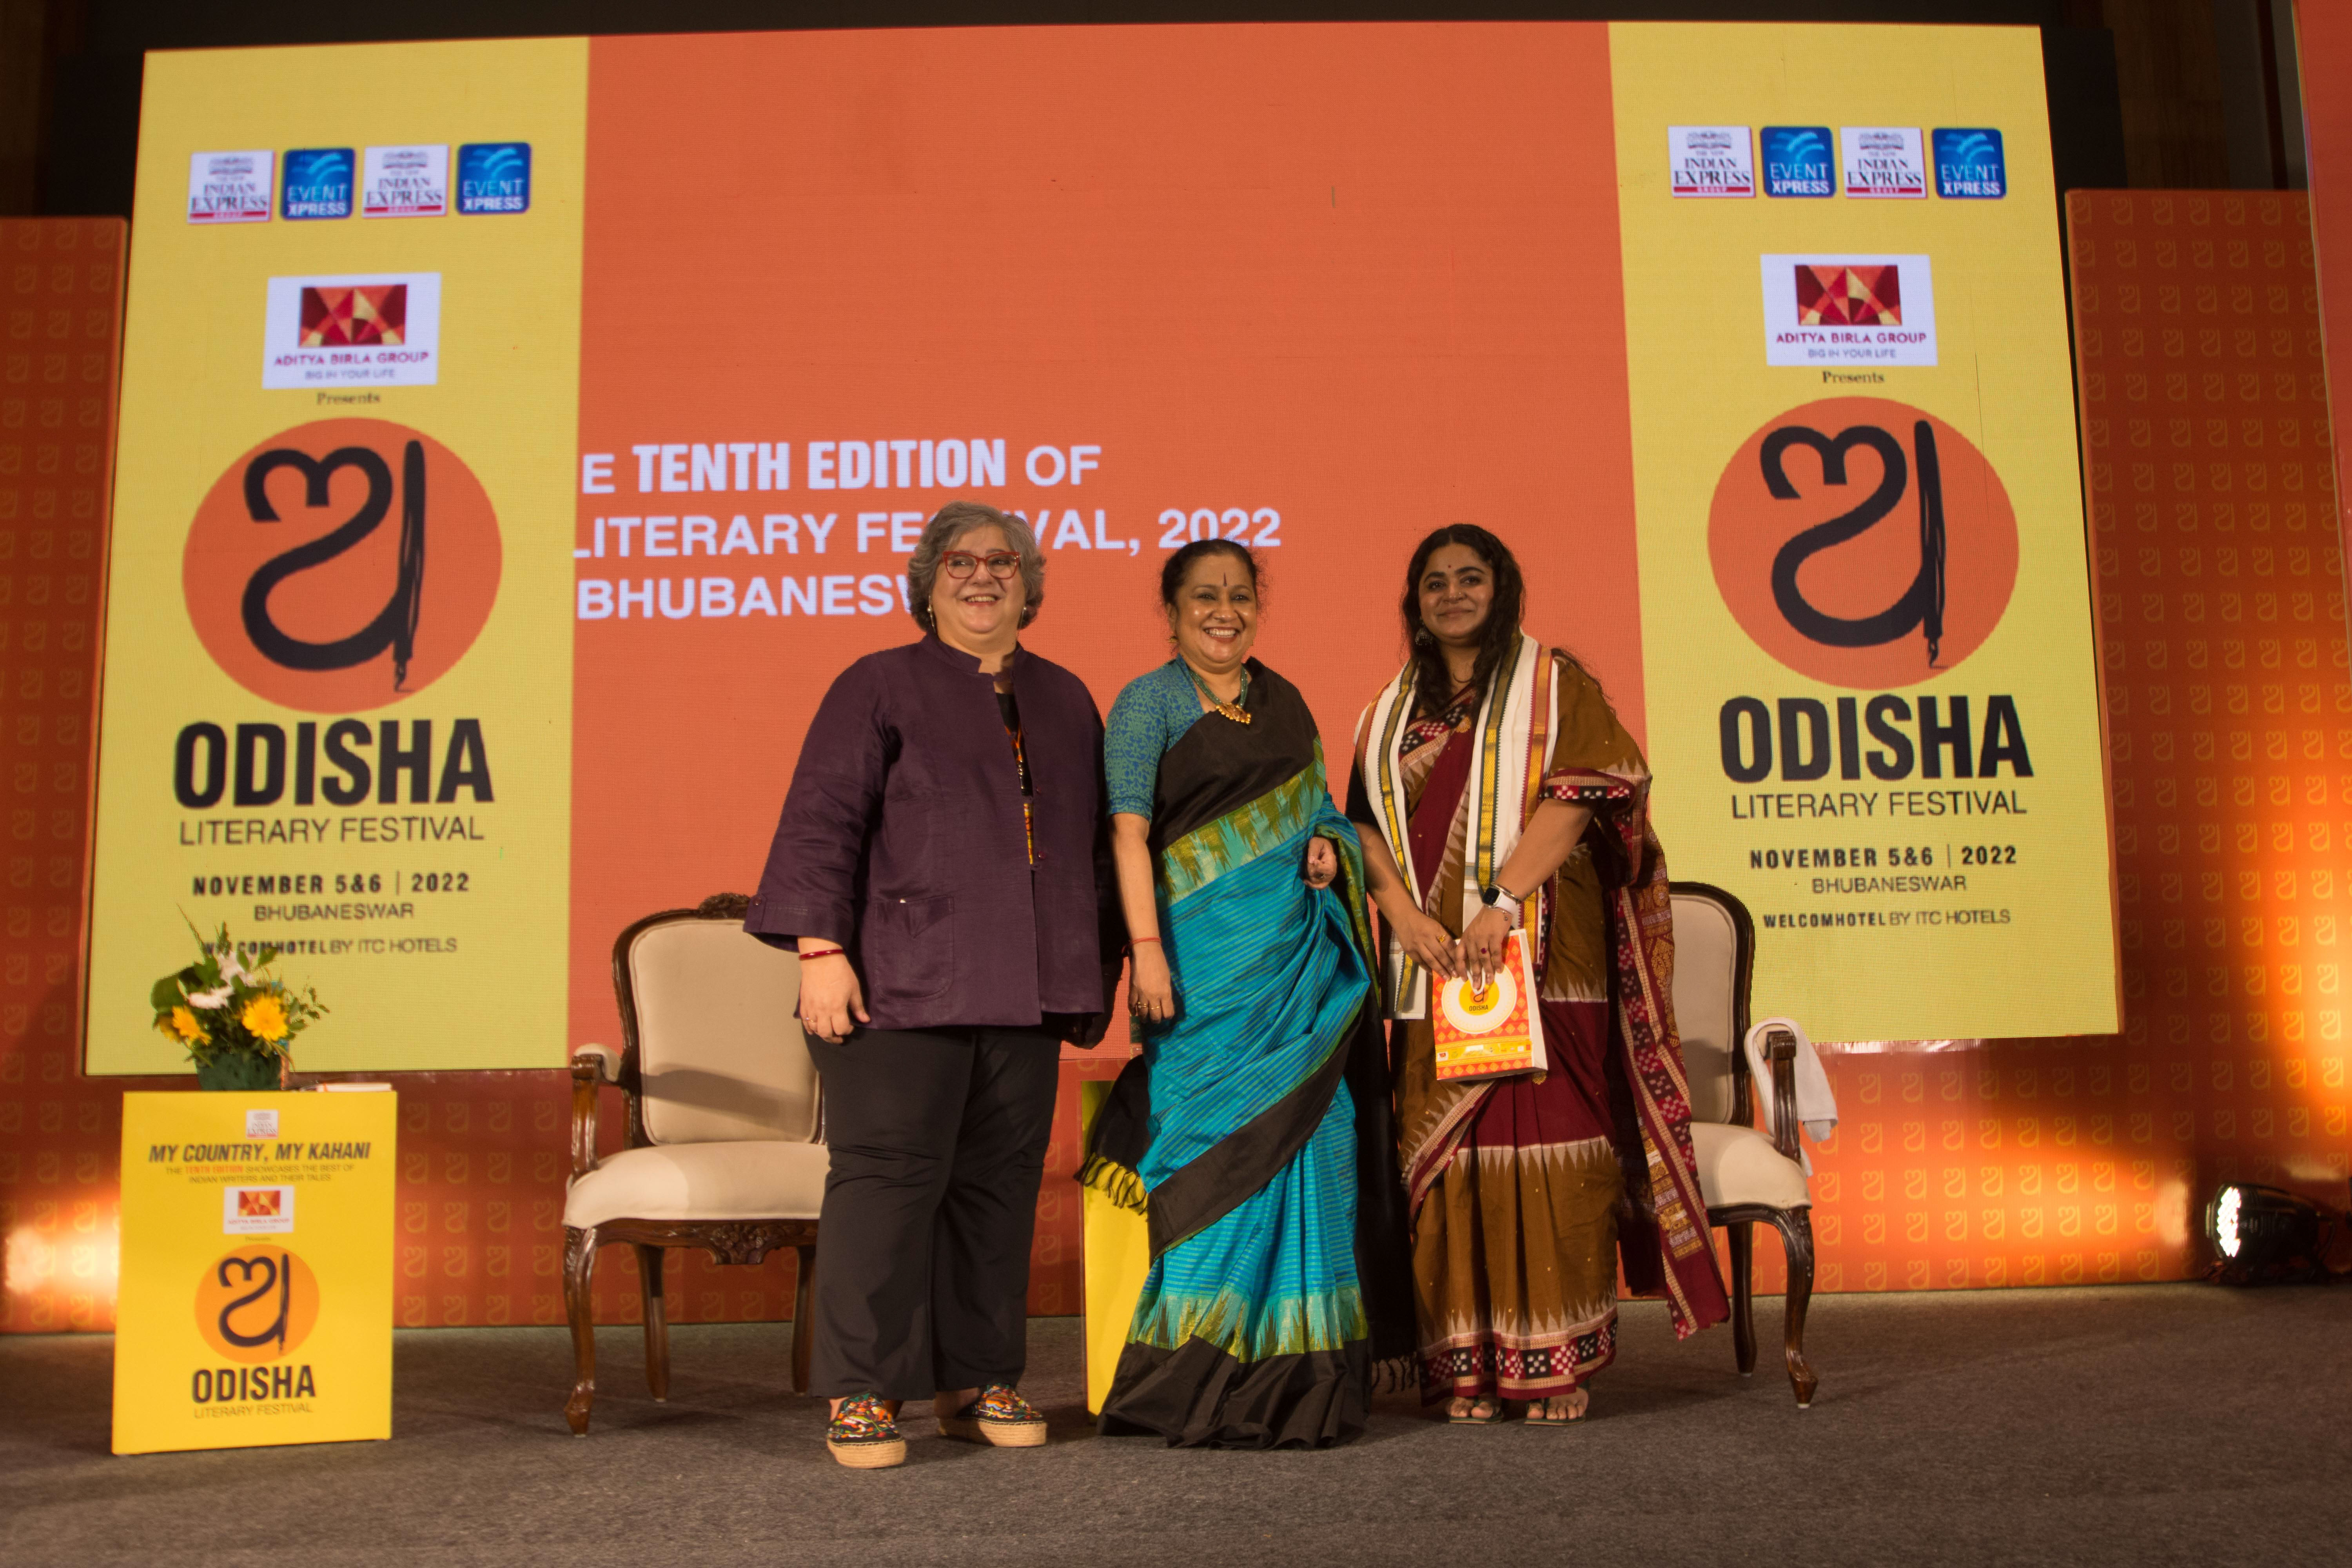 From left to right - Host Kaveree Bamzai, TNIE CEO Lakshmi Menon, and Ashwiny Iyer Tiwari, Writer and director on the first day of Odisha Literay Festival in Bhubaneswar. Express / DEBADATTA MALLICK